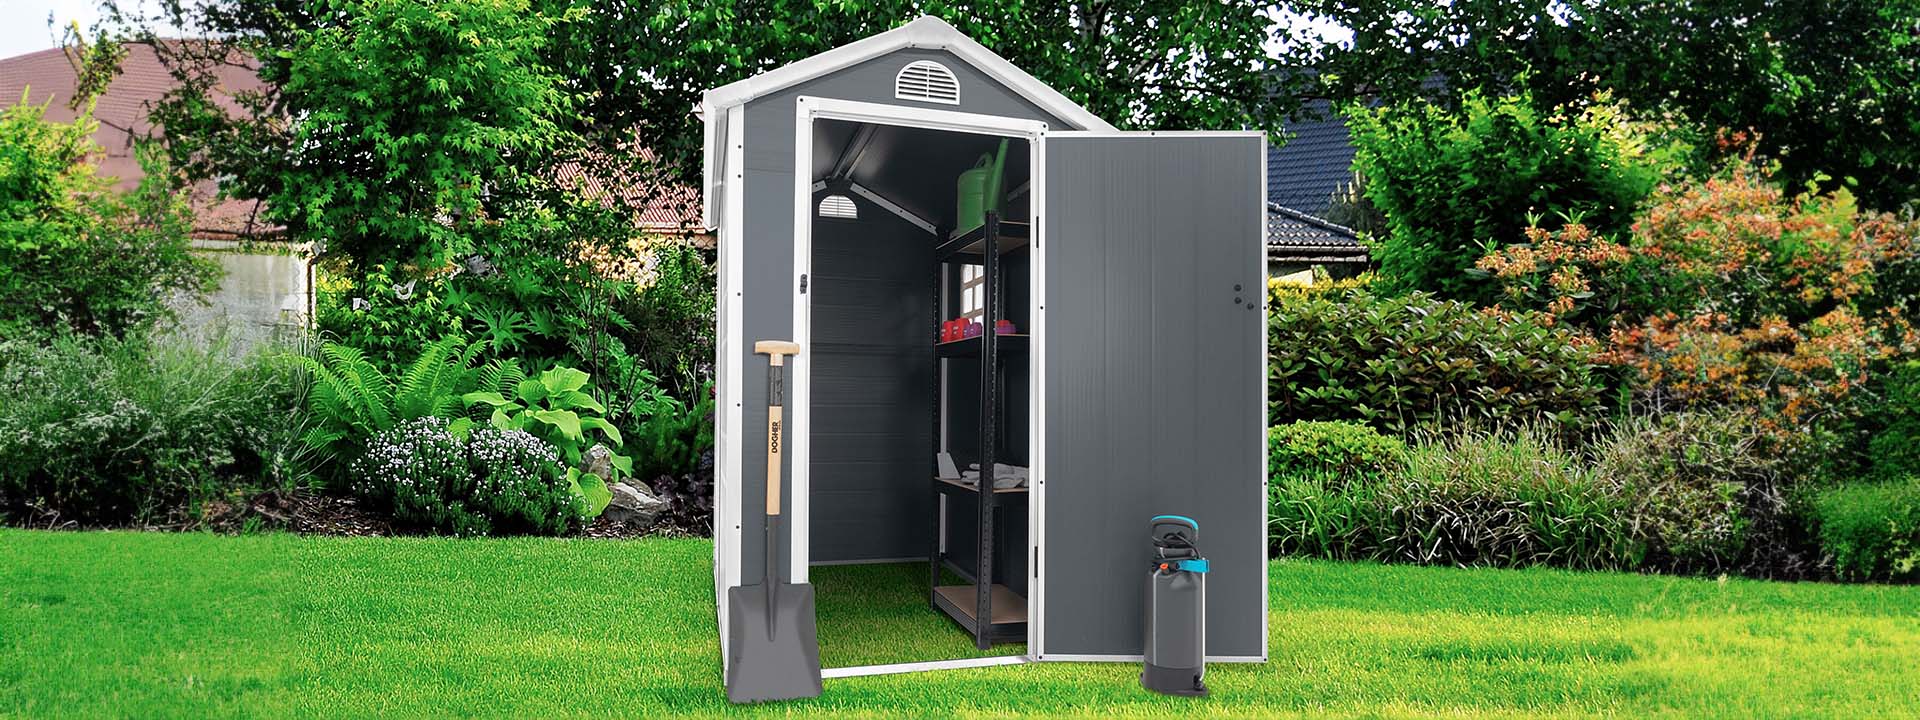 Garden Sheds. A place for everything and everything in its place